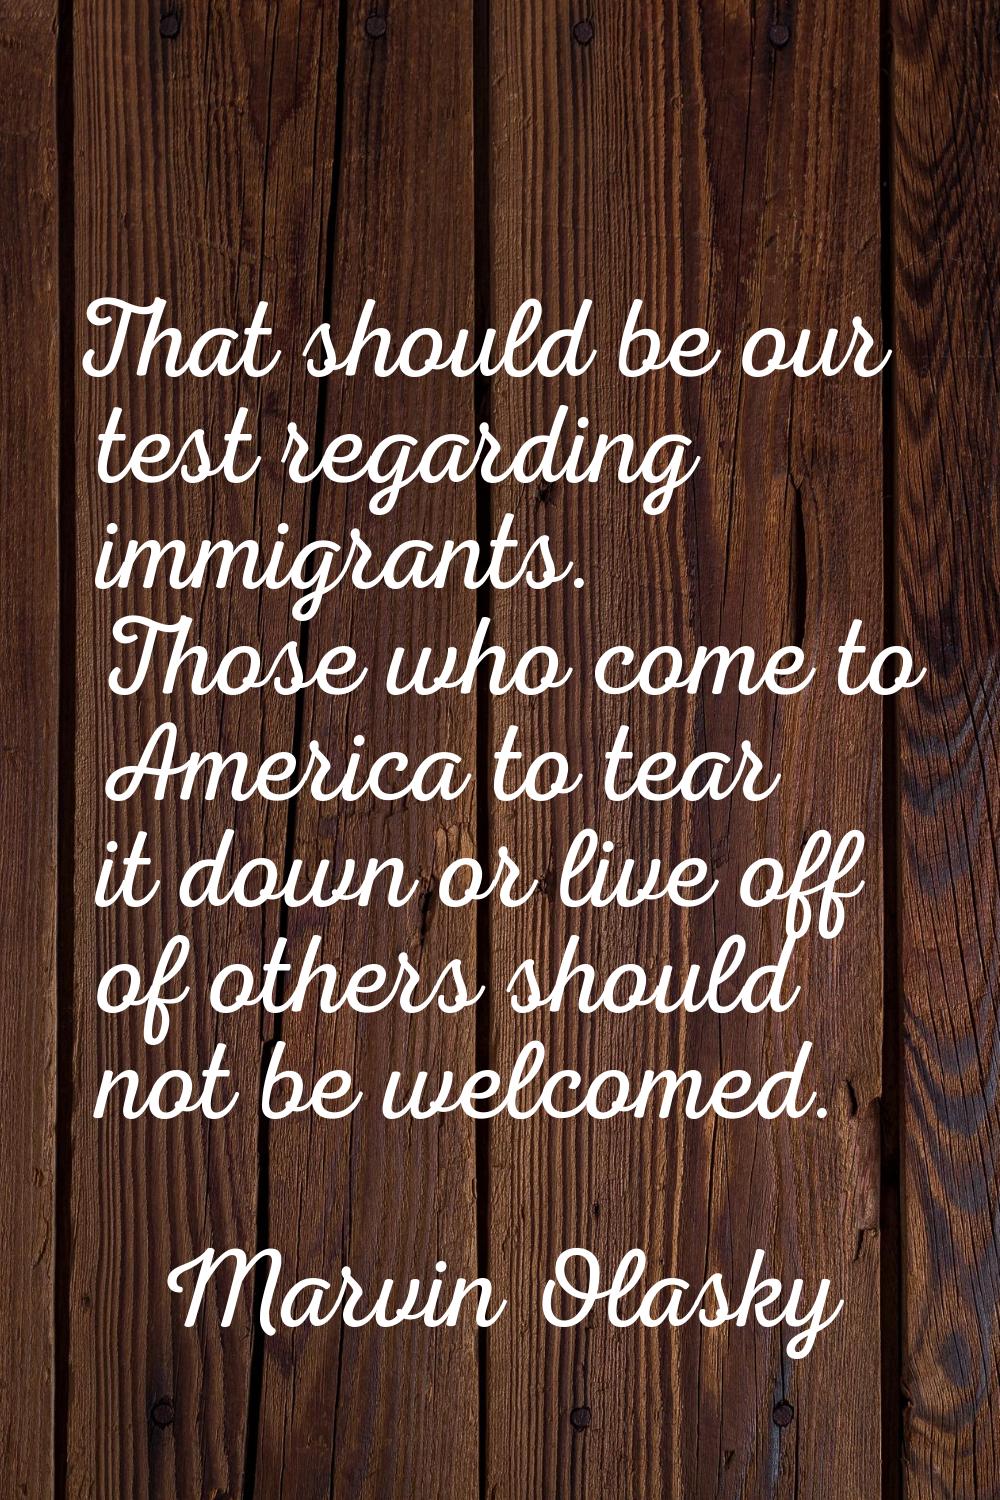 That should be our test regarding immigrants. Those who come to America to tear it down or live off